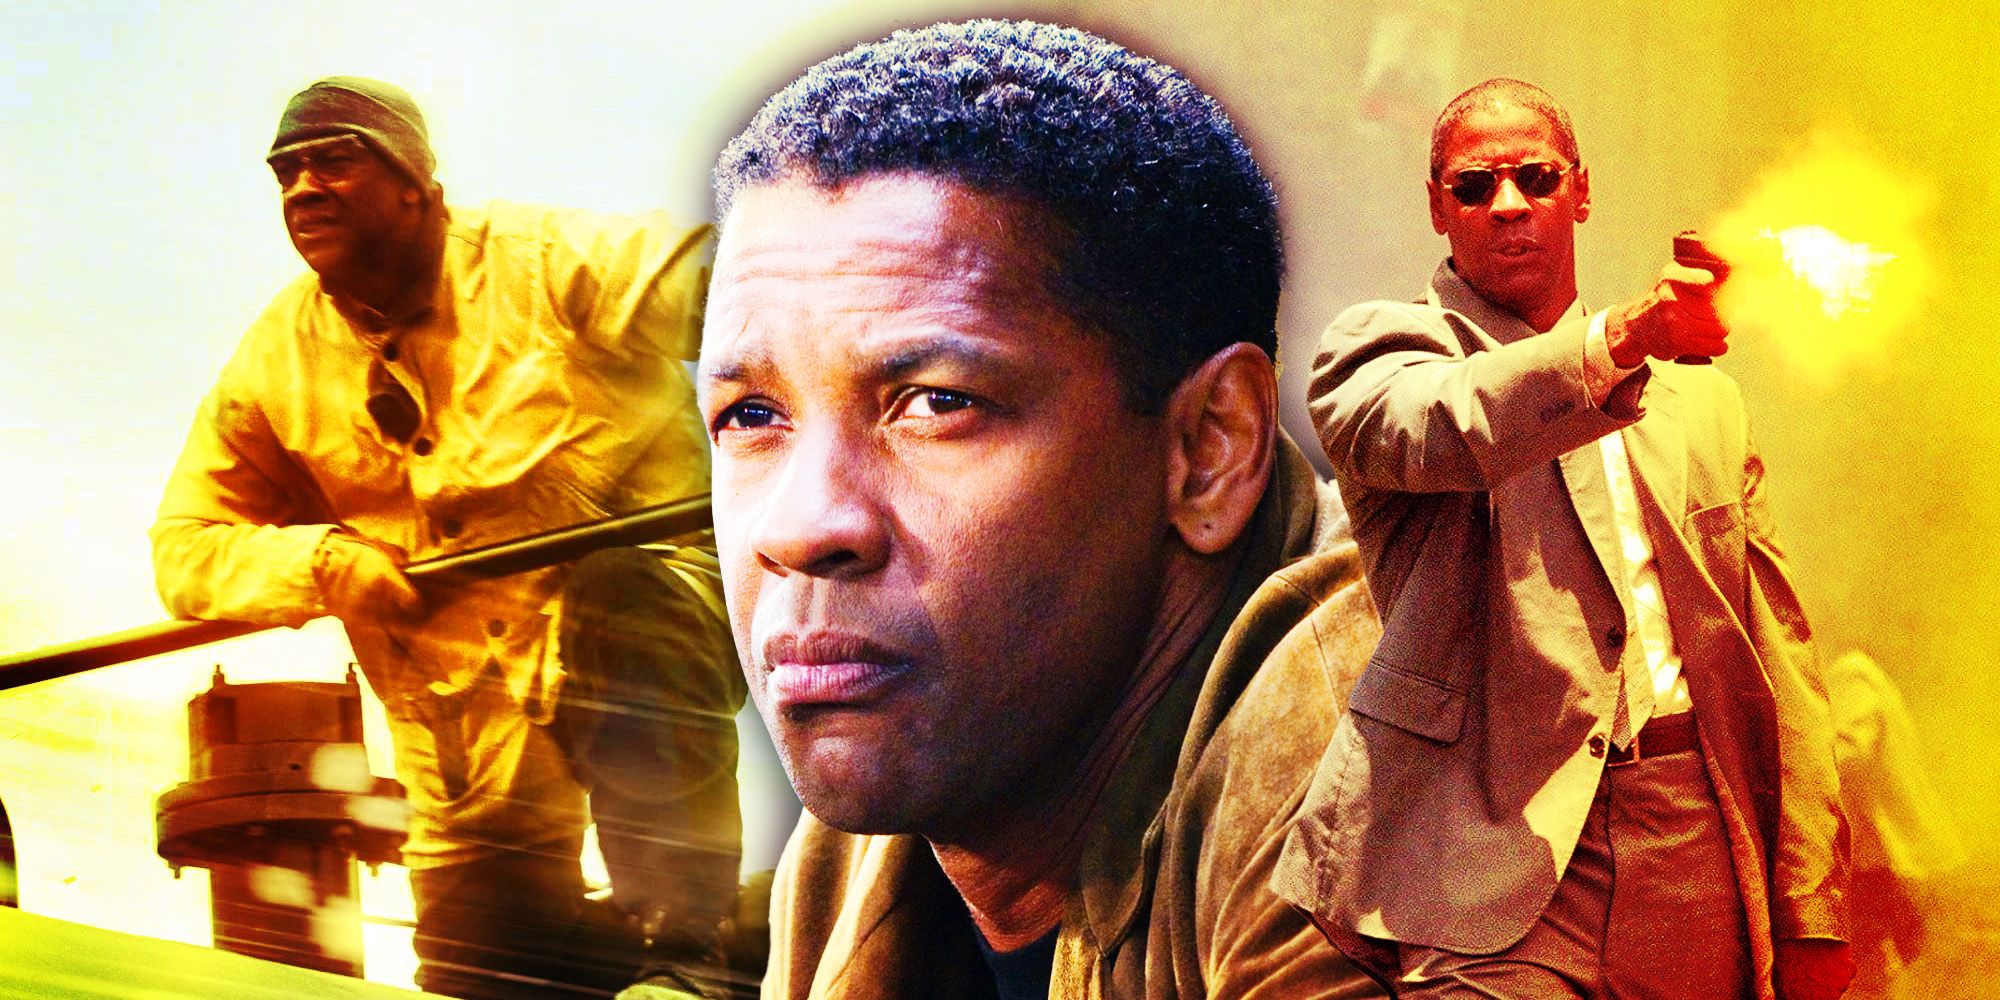 Denzel Washington as John W. Creasy from Man on Fire and Frank Barnes from Unstoppable